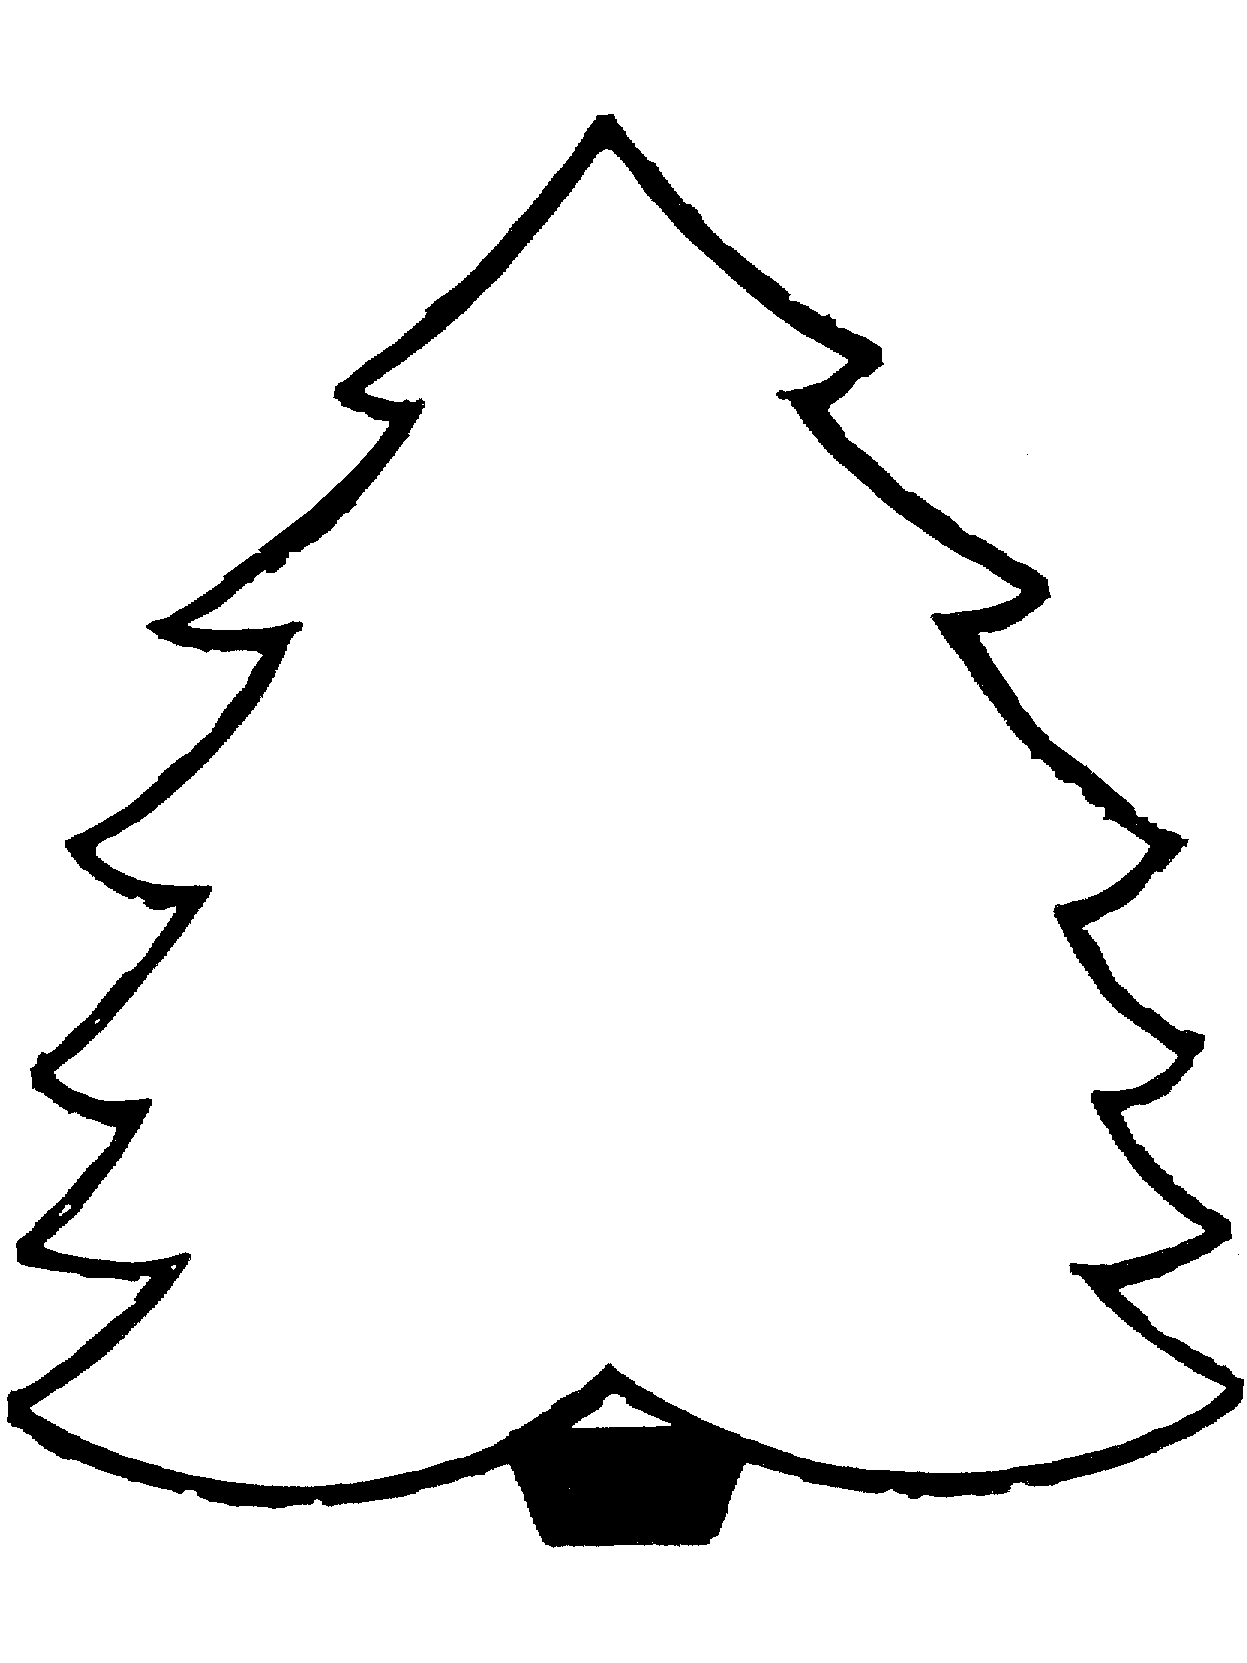 Christmas Tree Clip Art Outline - Cliparts.co